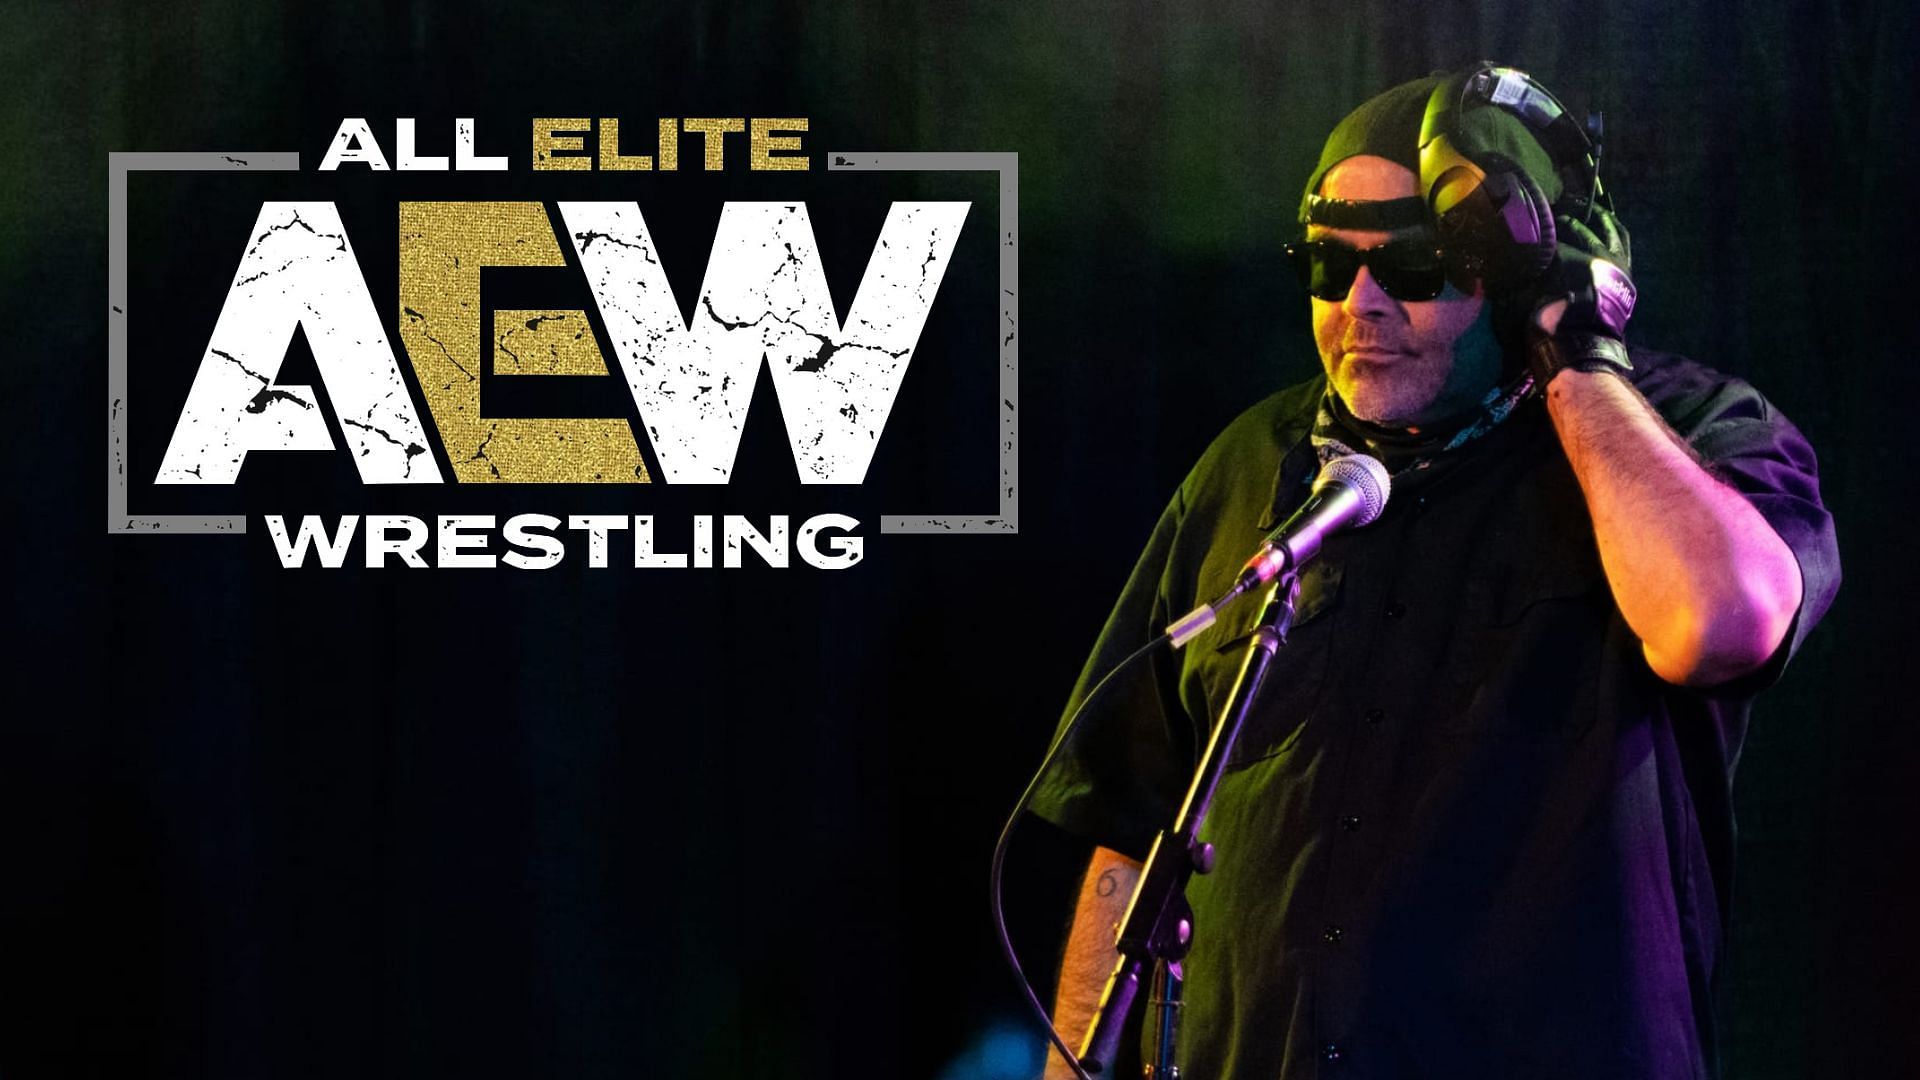 Konnan had some interesting thoughts to share recently